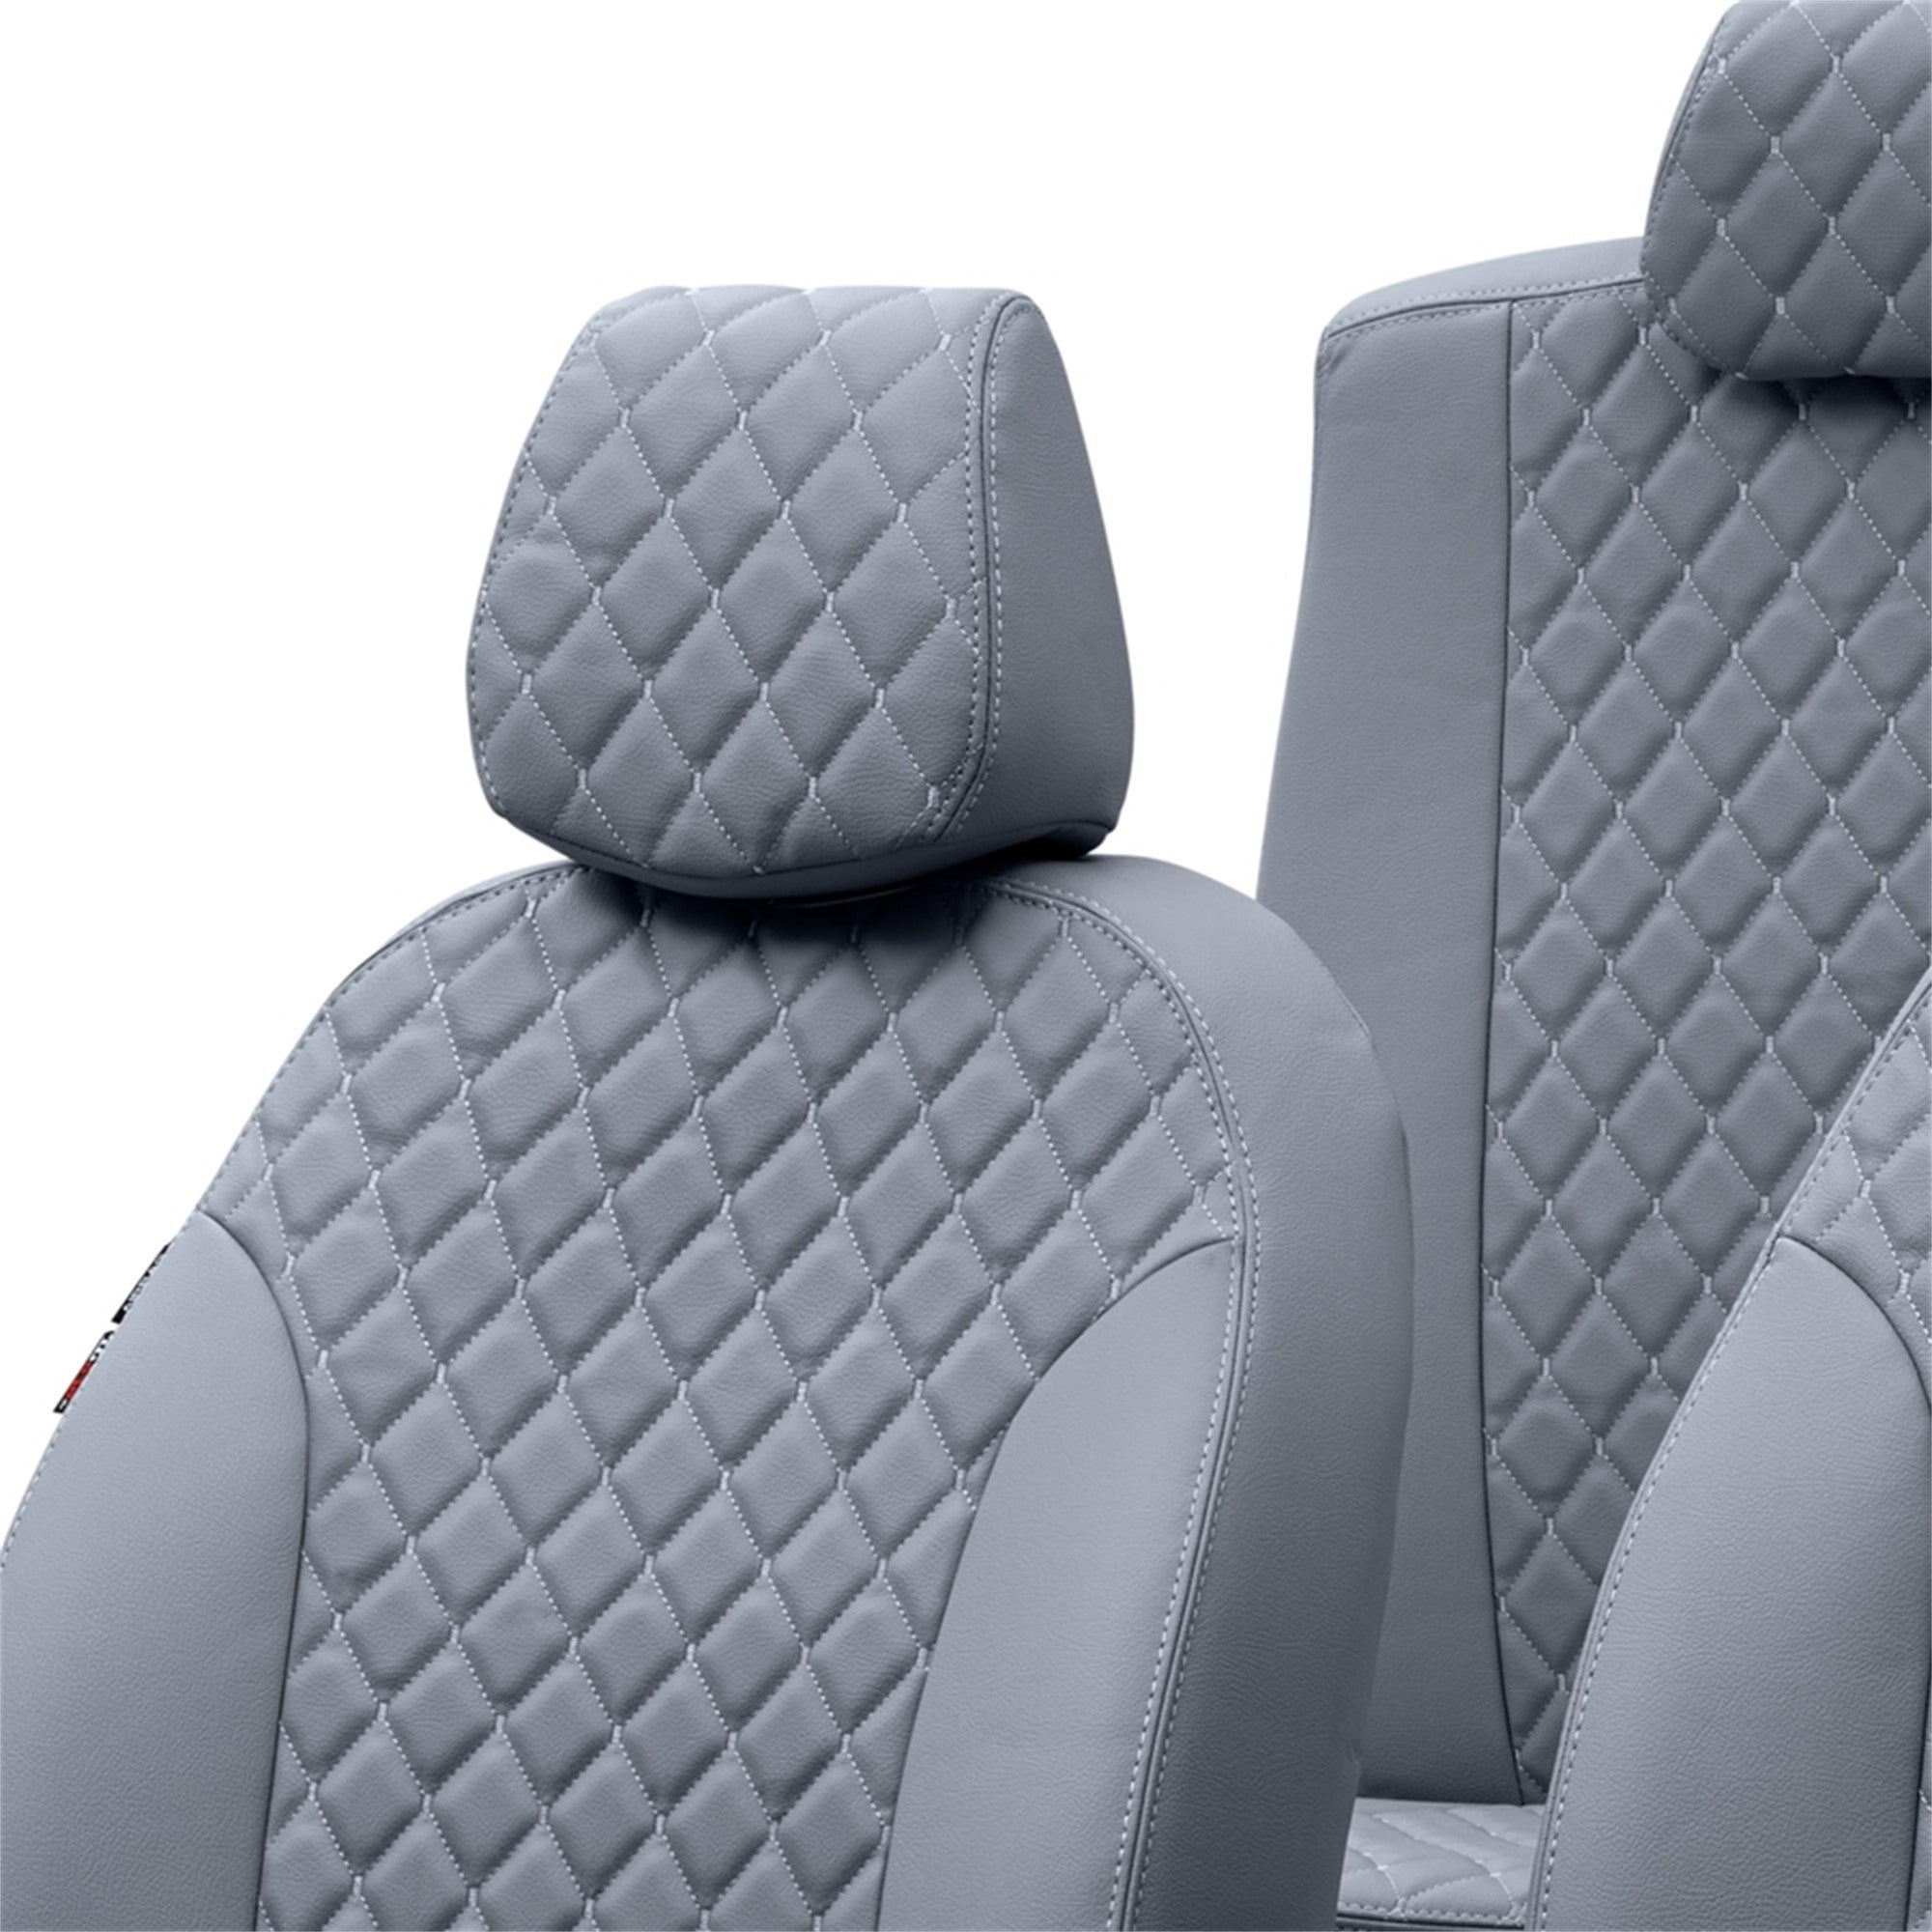 Are Car Seat Covers Safe ?